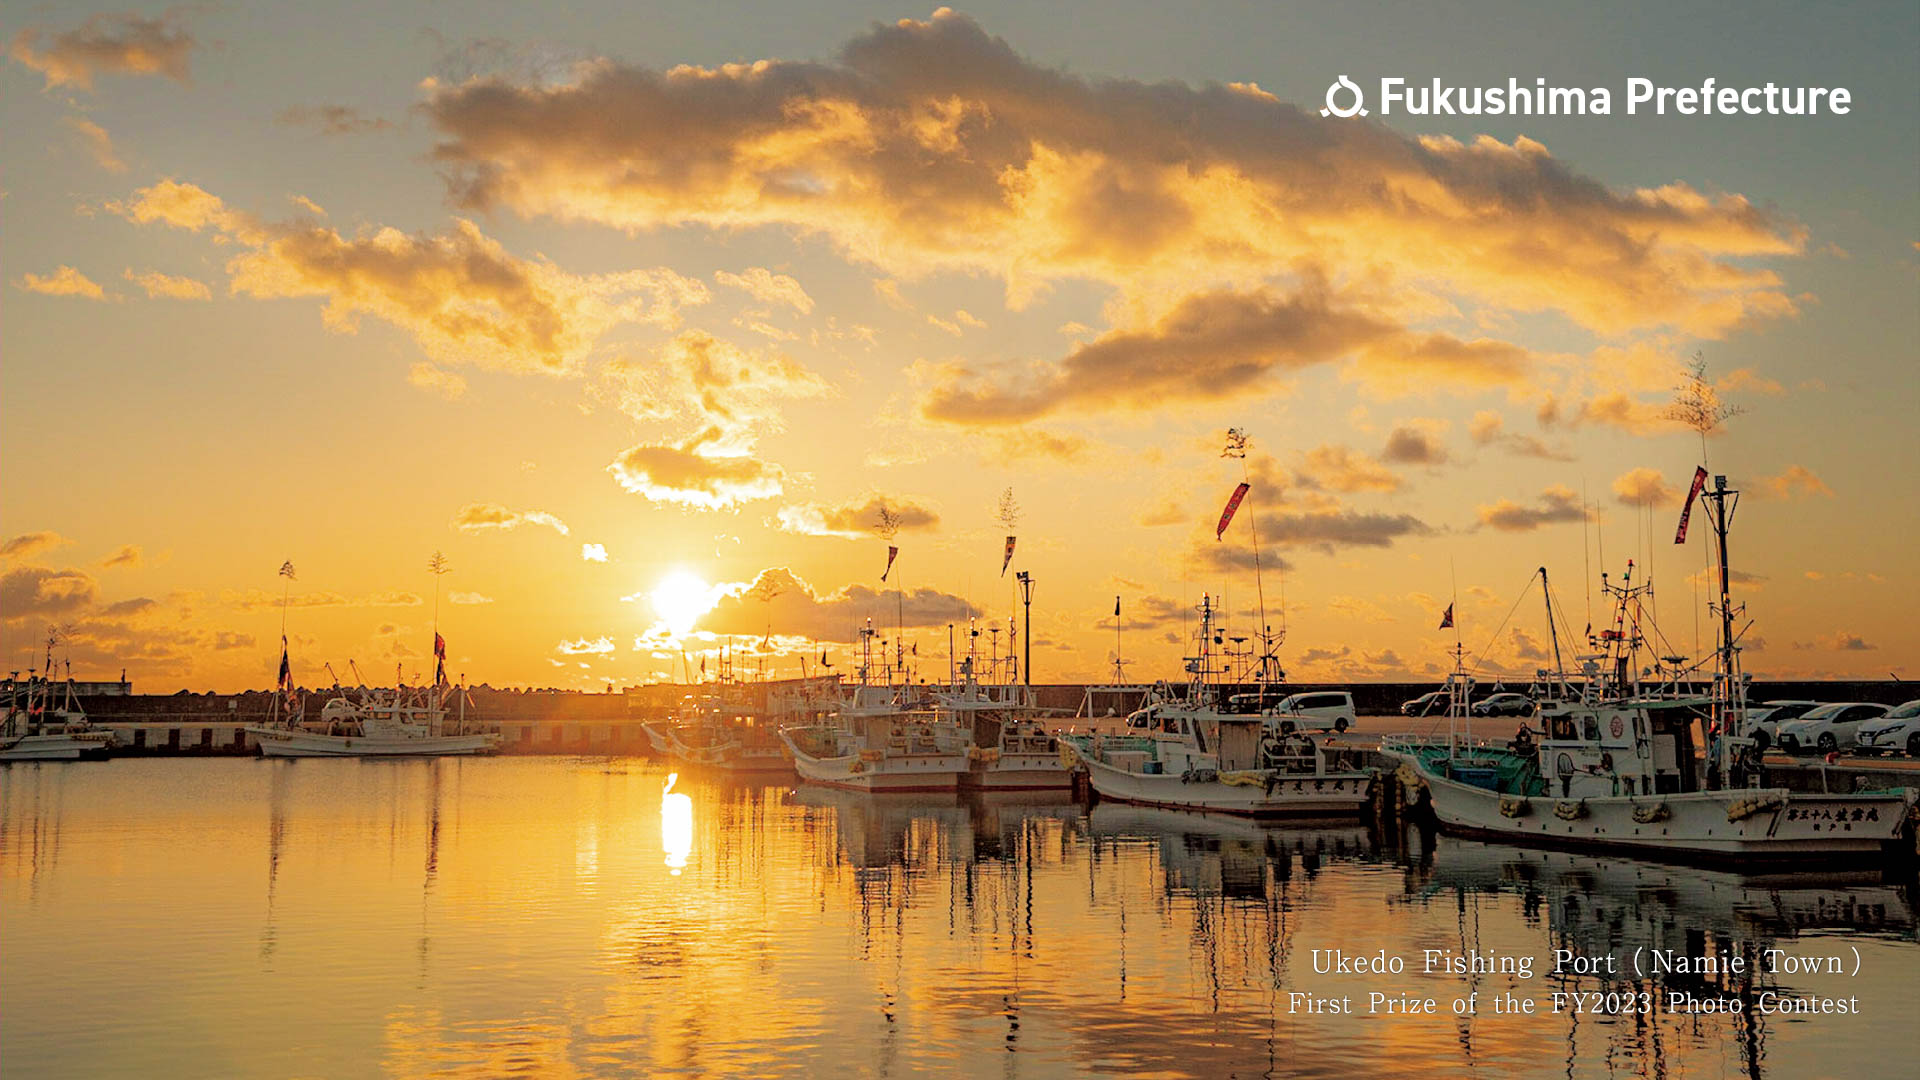 Ukedo Fishing Port （Namie Town）First Prize of the FY2023 Photo Contest